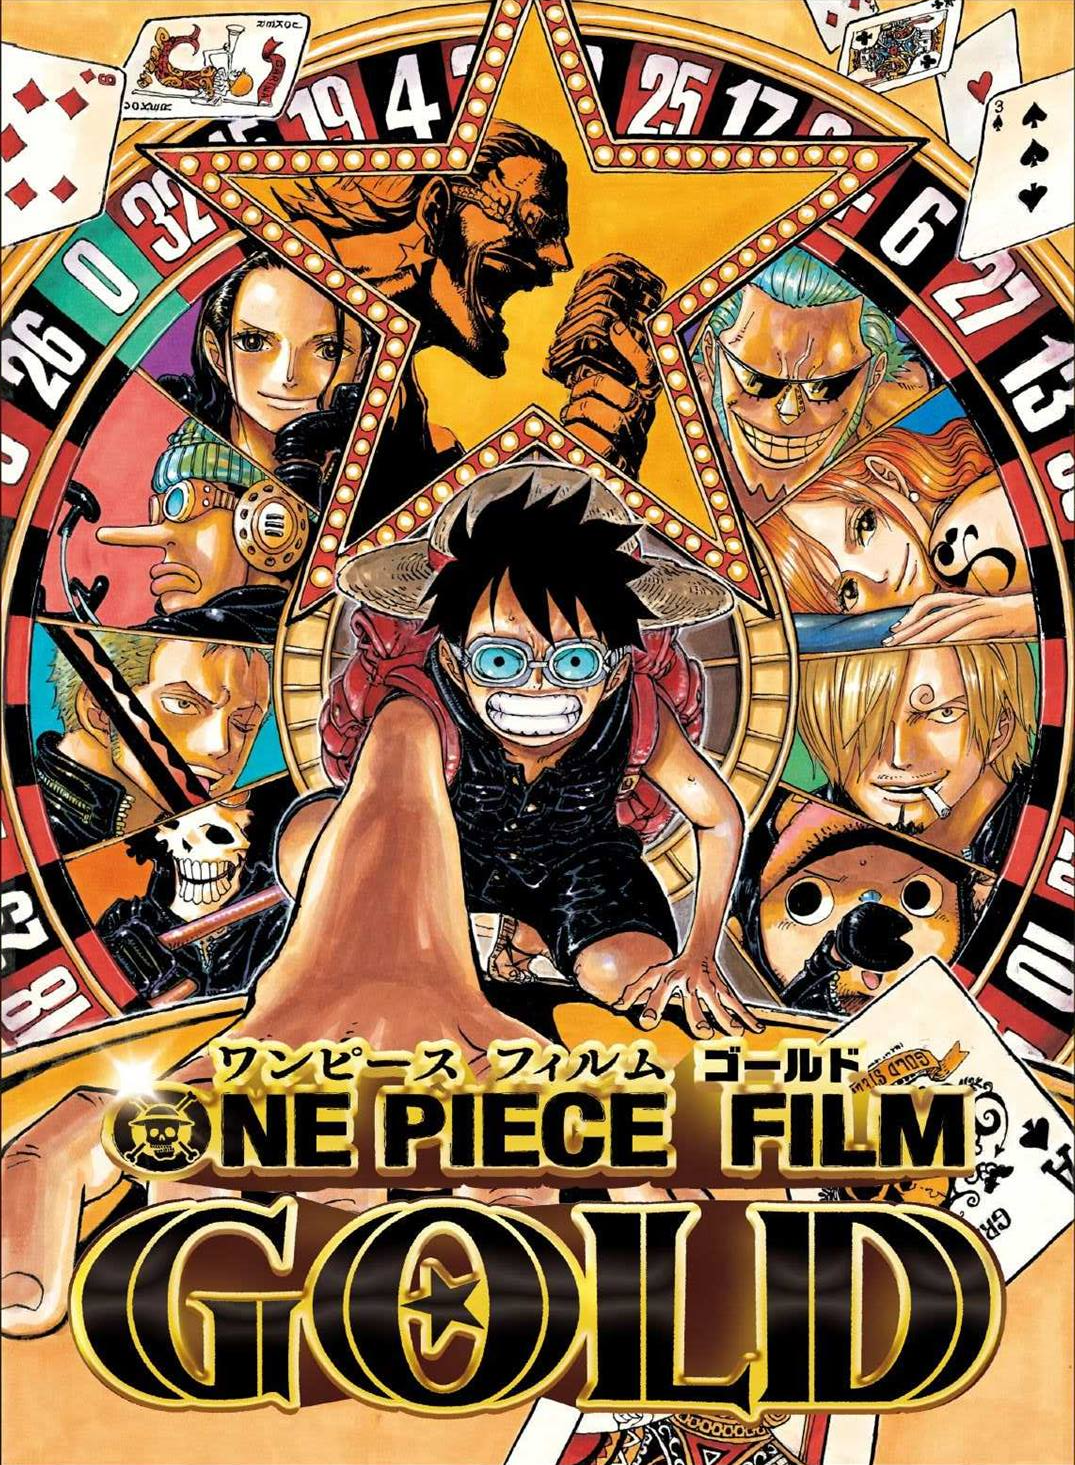  REVIEW – One Piece Gold